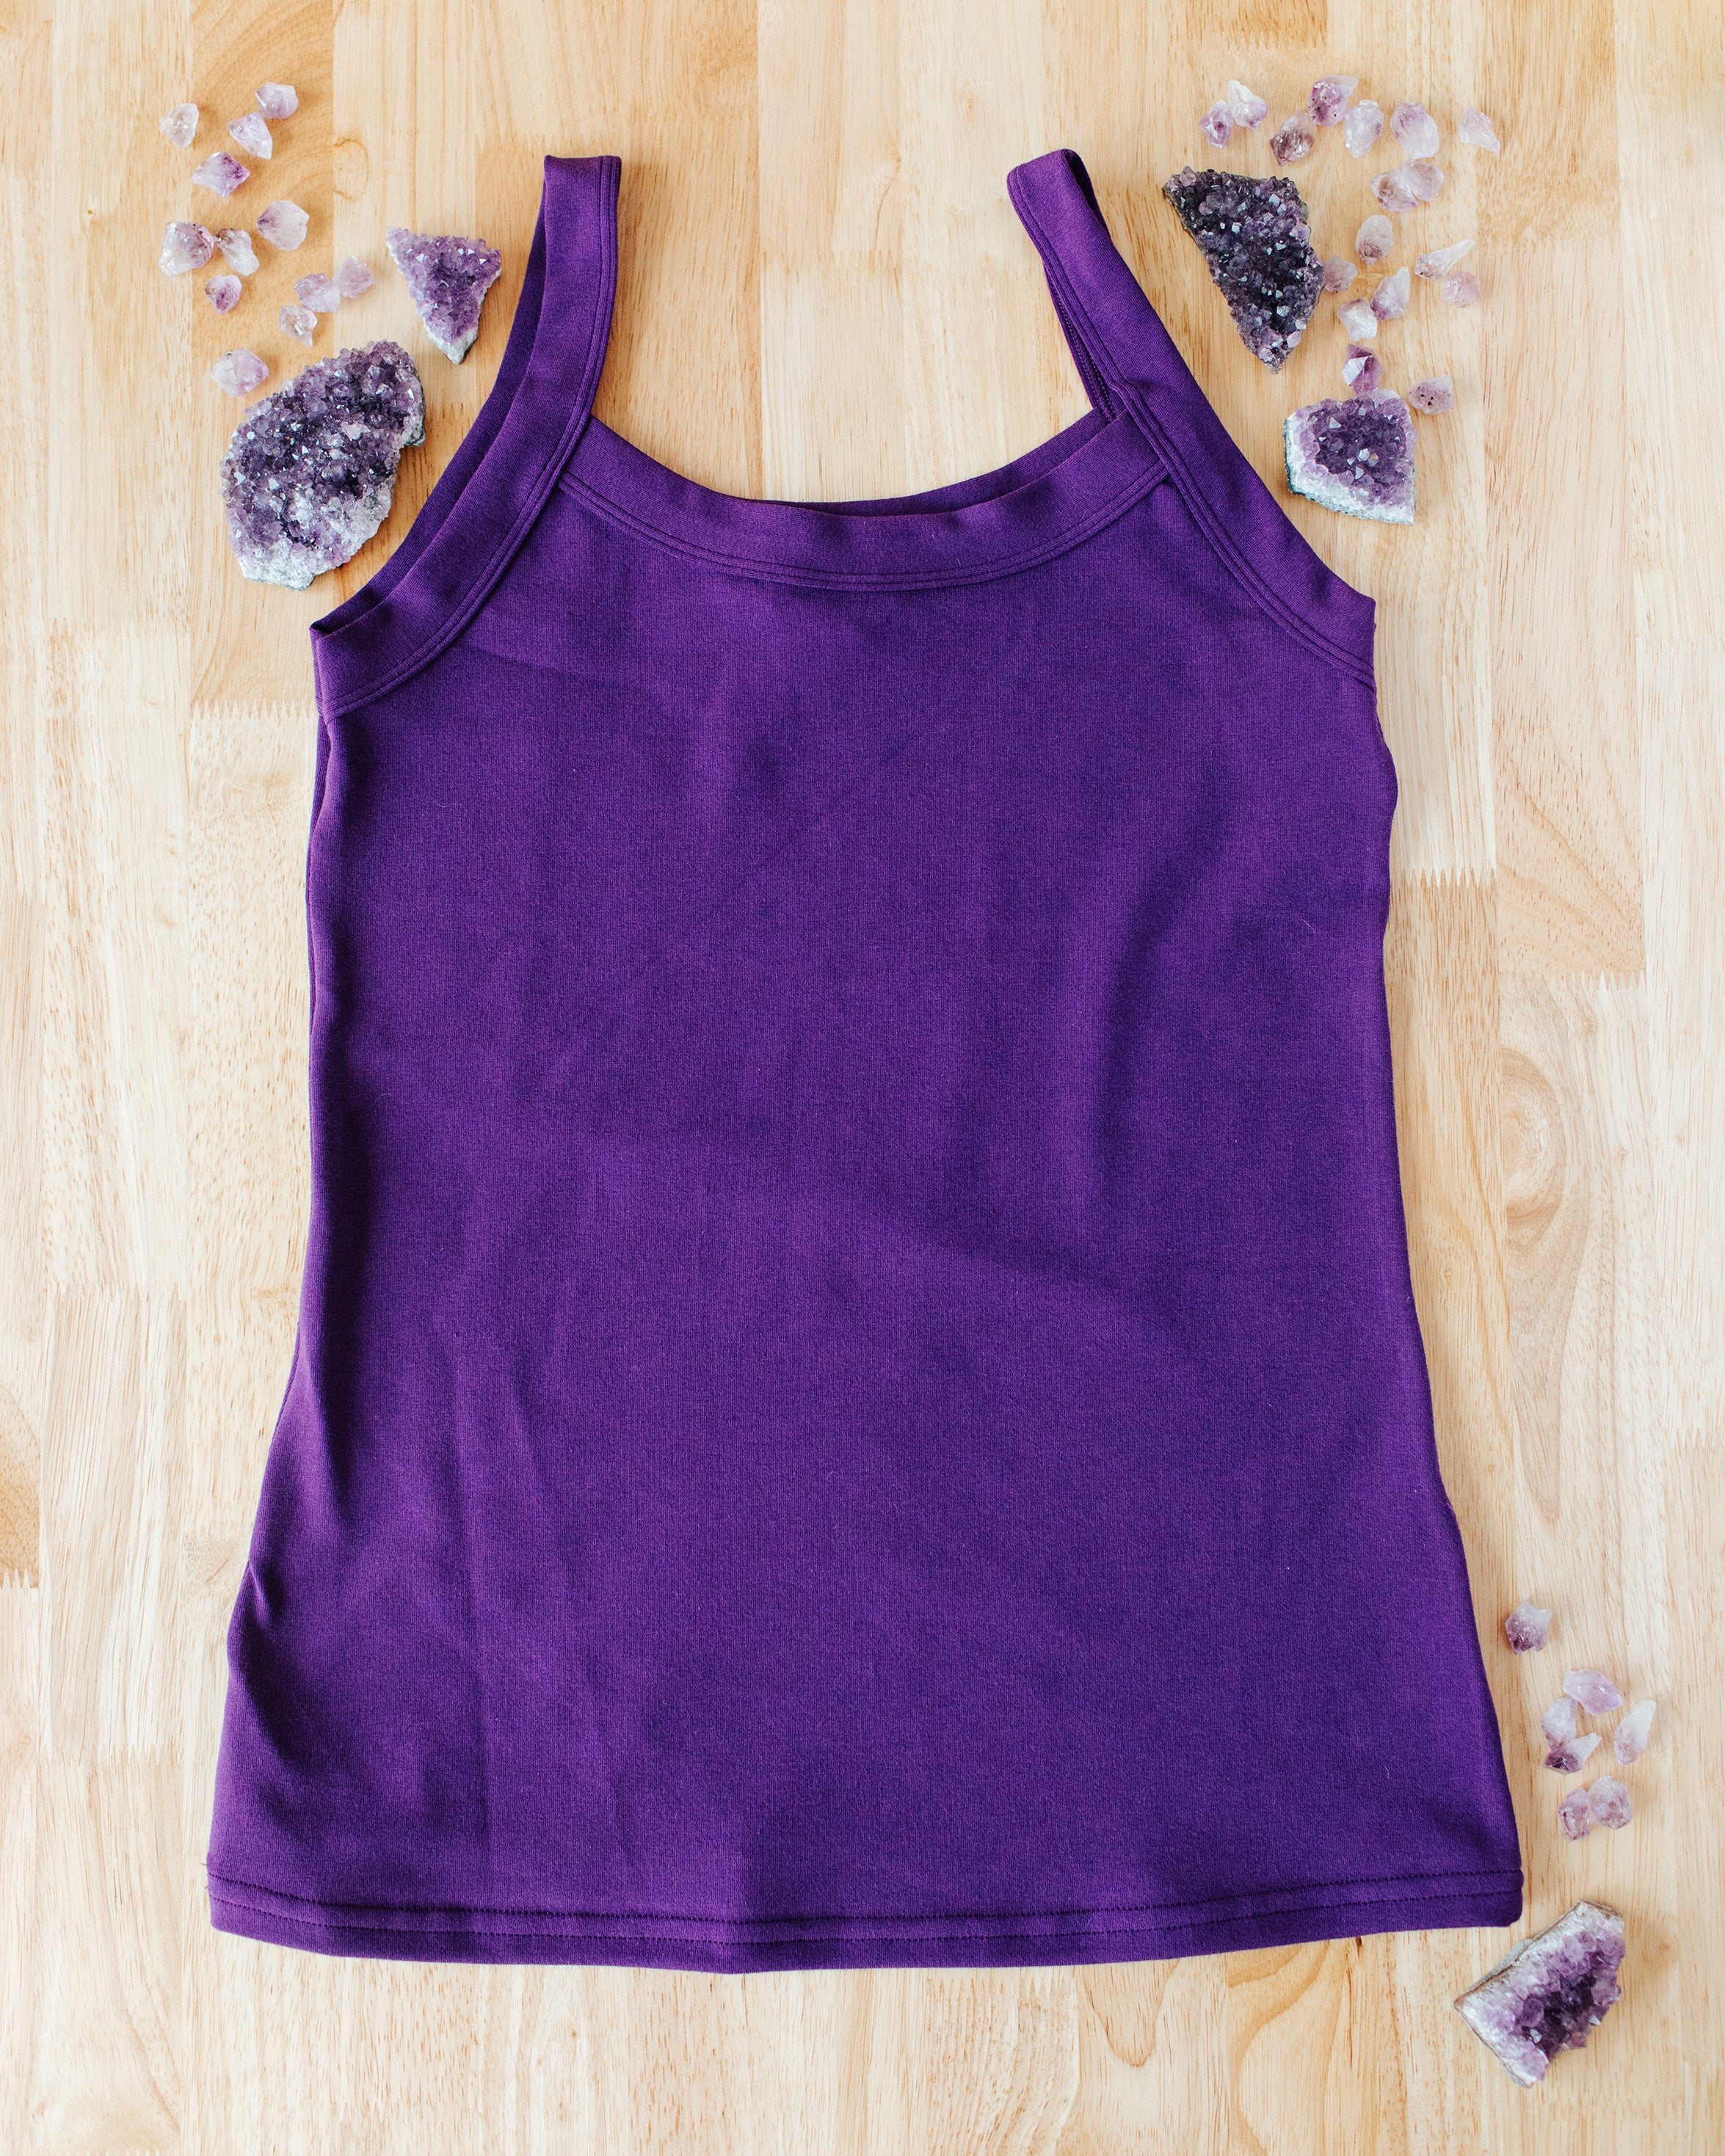 Flat lay of purple Deep Amethyst Camisole on a wood surface with big and small amethyst stones surrounding it.